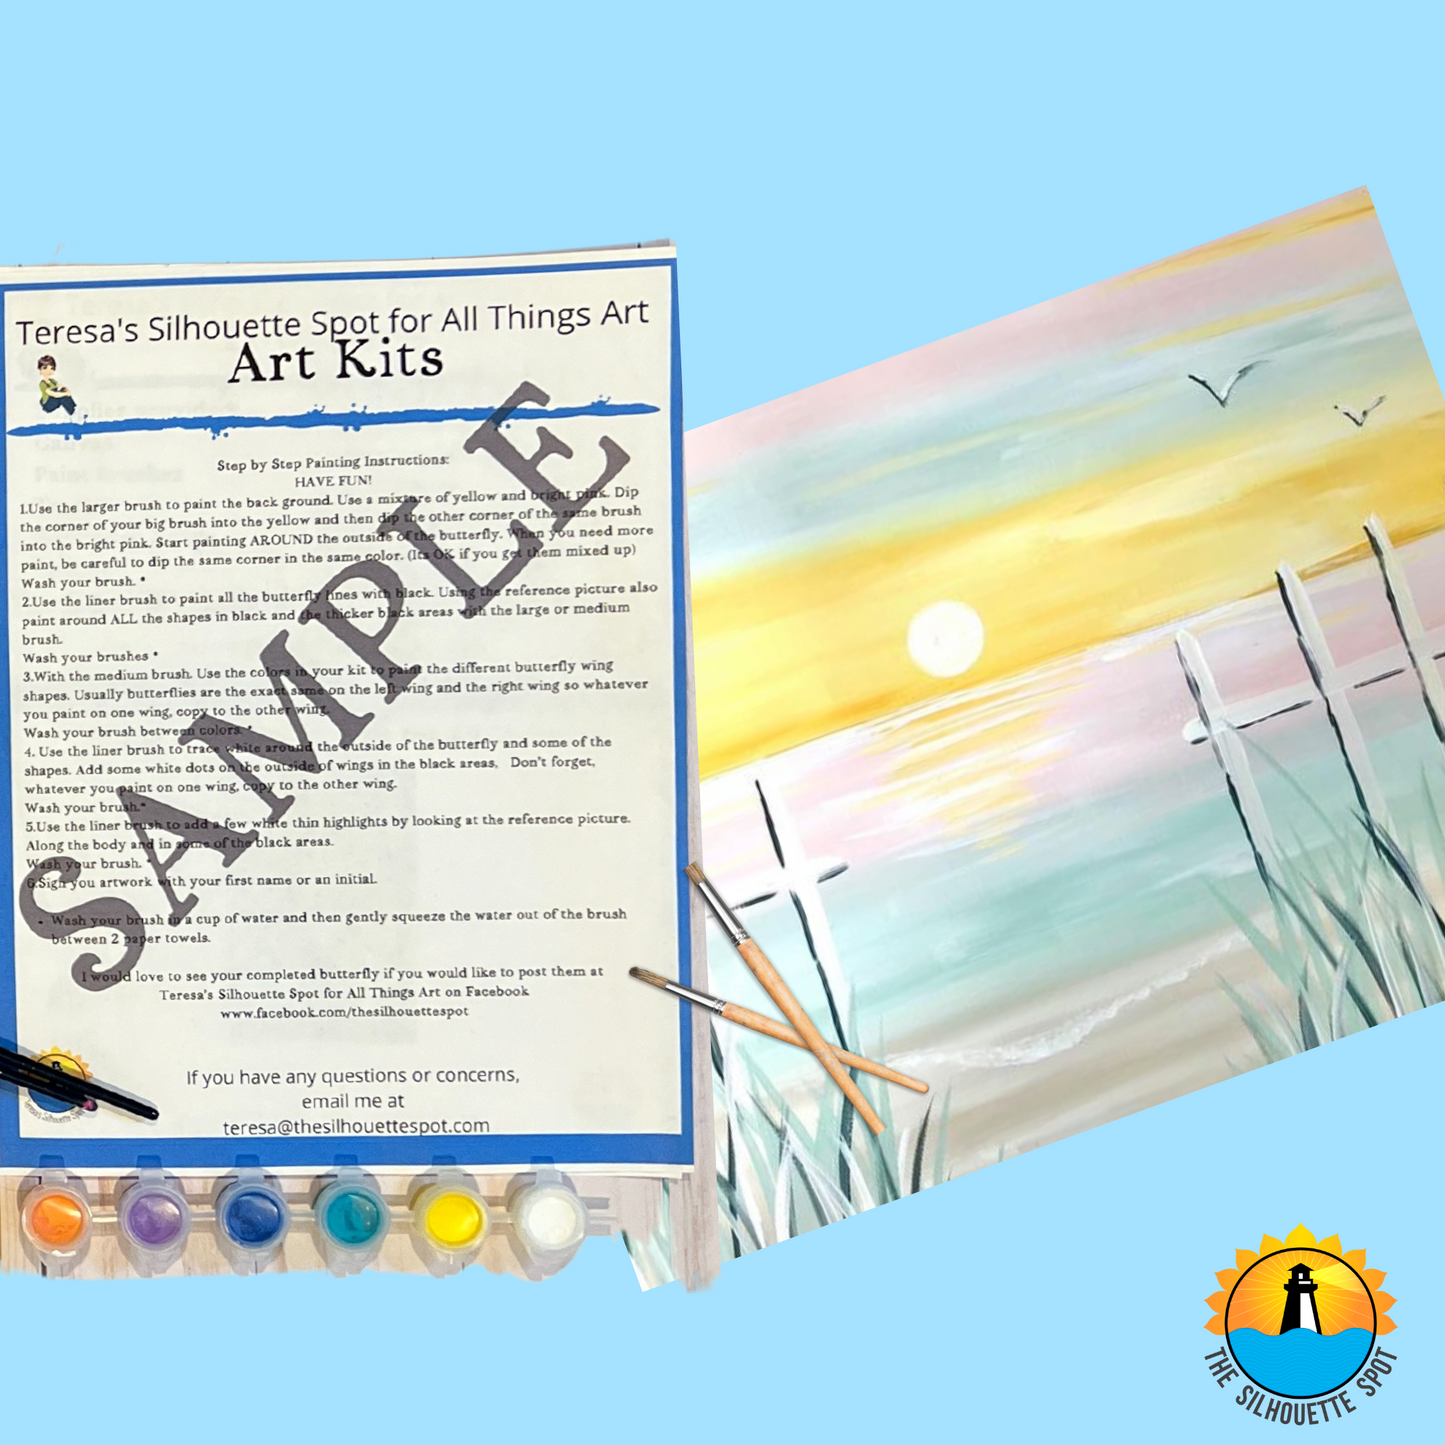 Canvas Complete Art Kit! Virtual at home Sunset Beach Scene DIY Art! Great For Beginners!